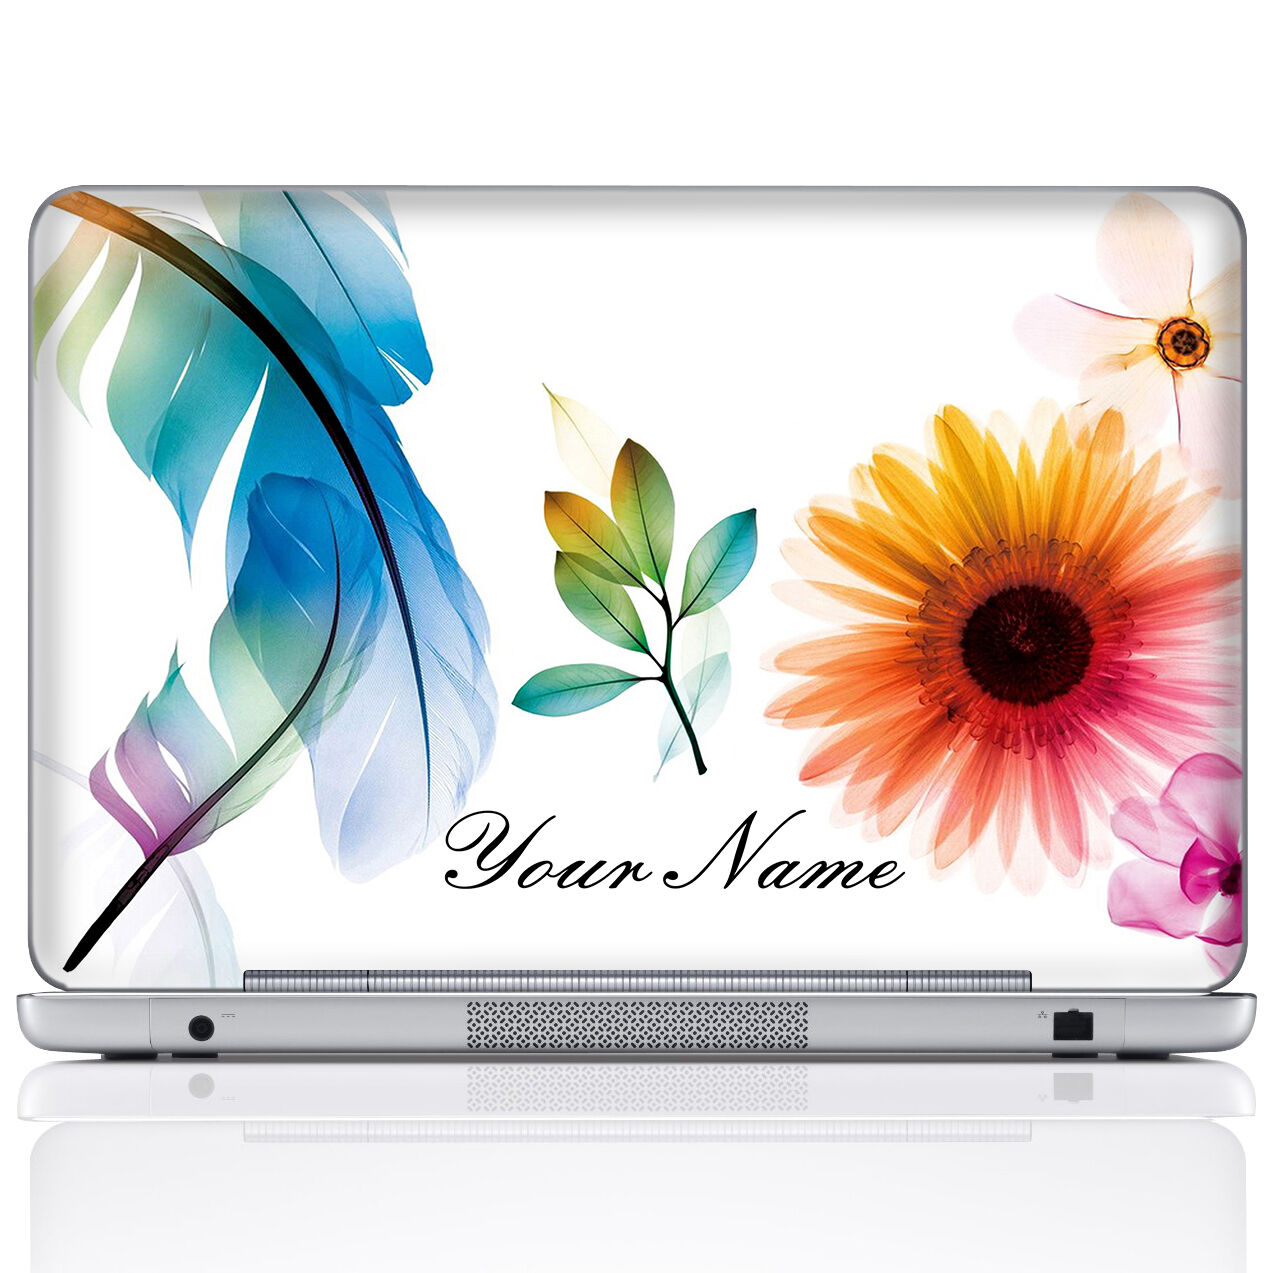 2023 High Quality Customized Laptop Computer Skin Sticker With Your Name / Word